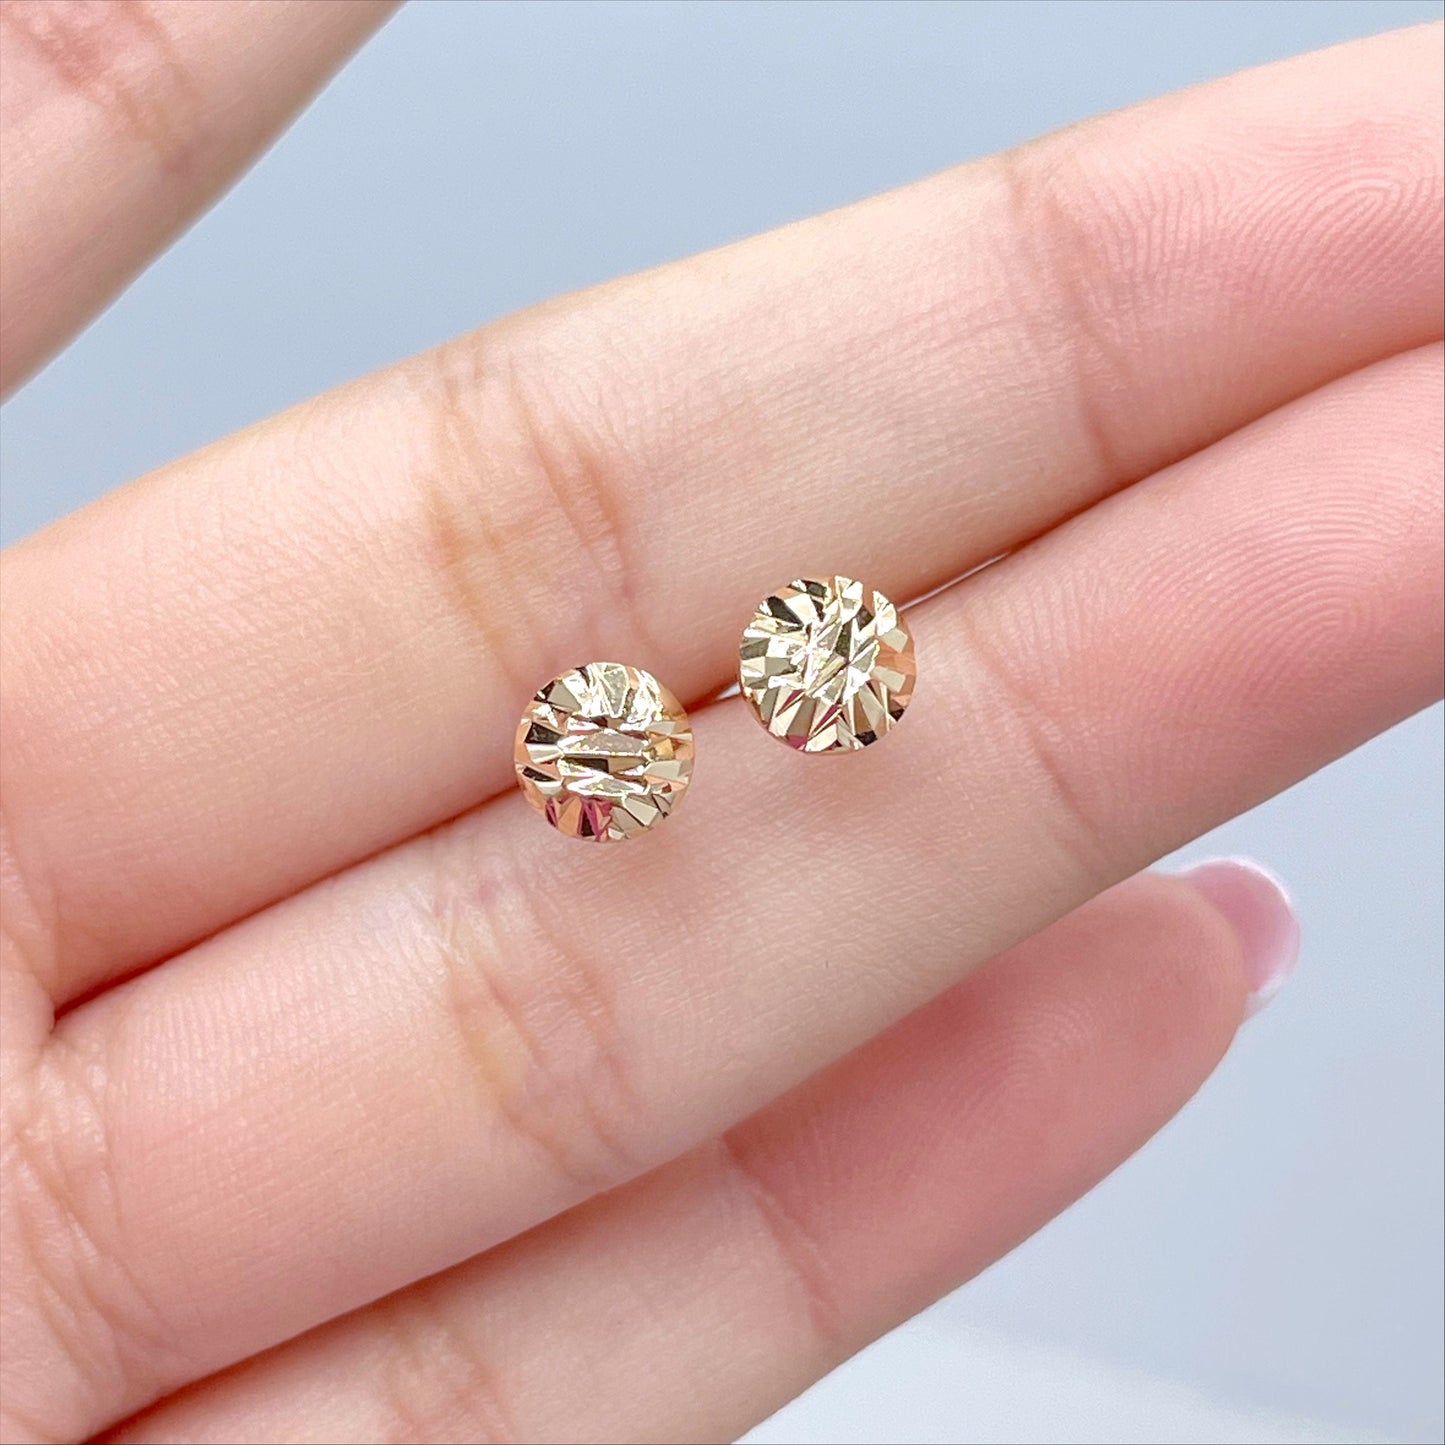 18k Gold Filled 6mm Ball Texturized Stud Earrings Wholesale Jewelry Making Supplies